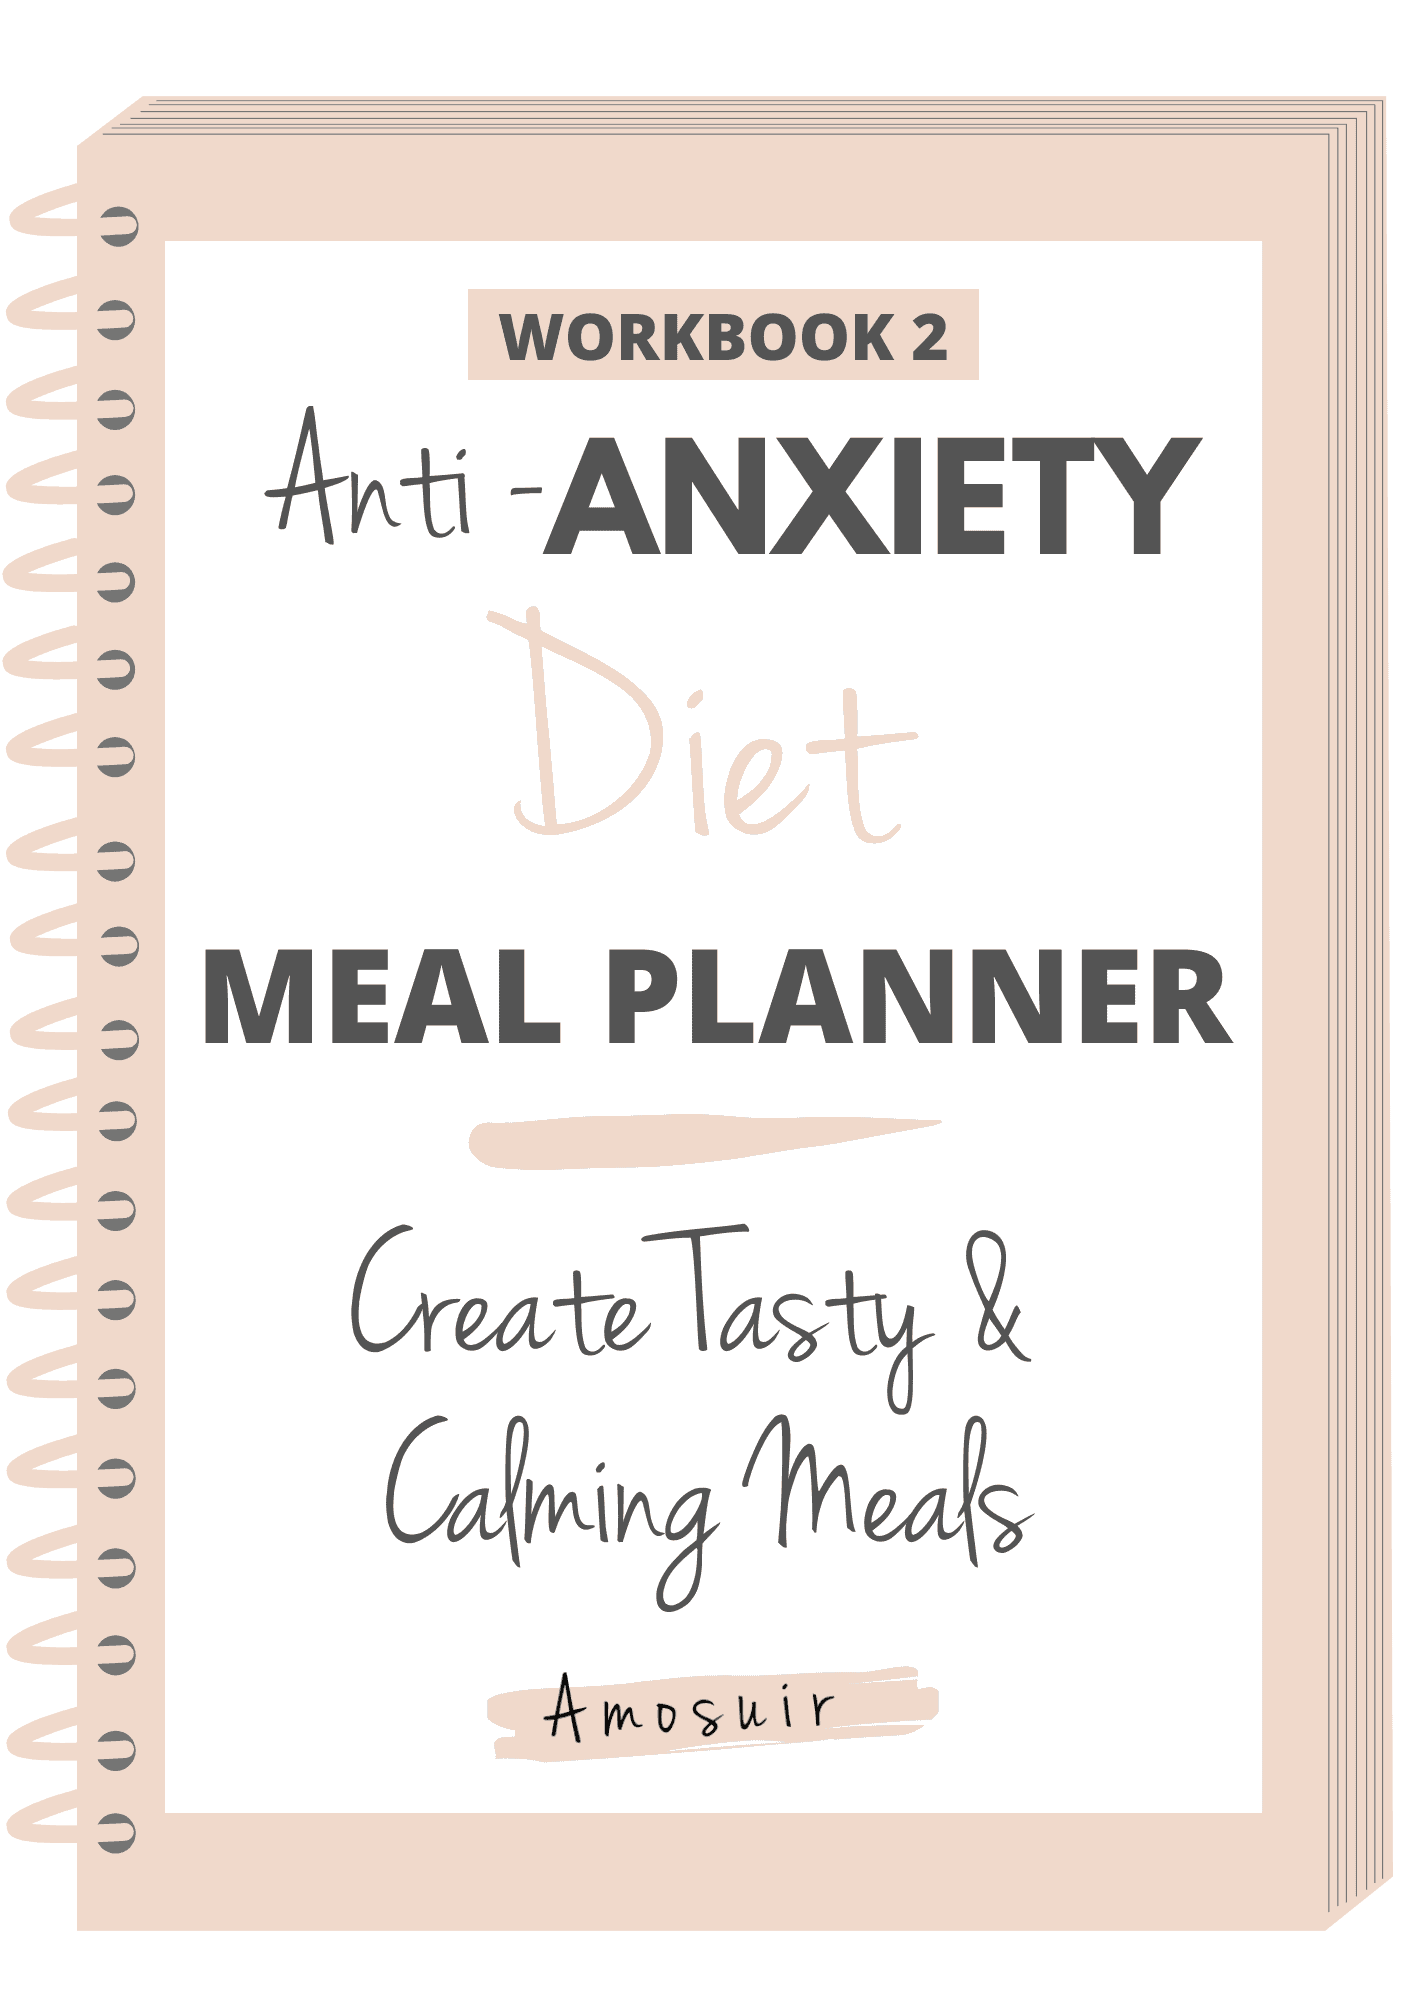 Anti-anxiety diet meal planner workbook front cover